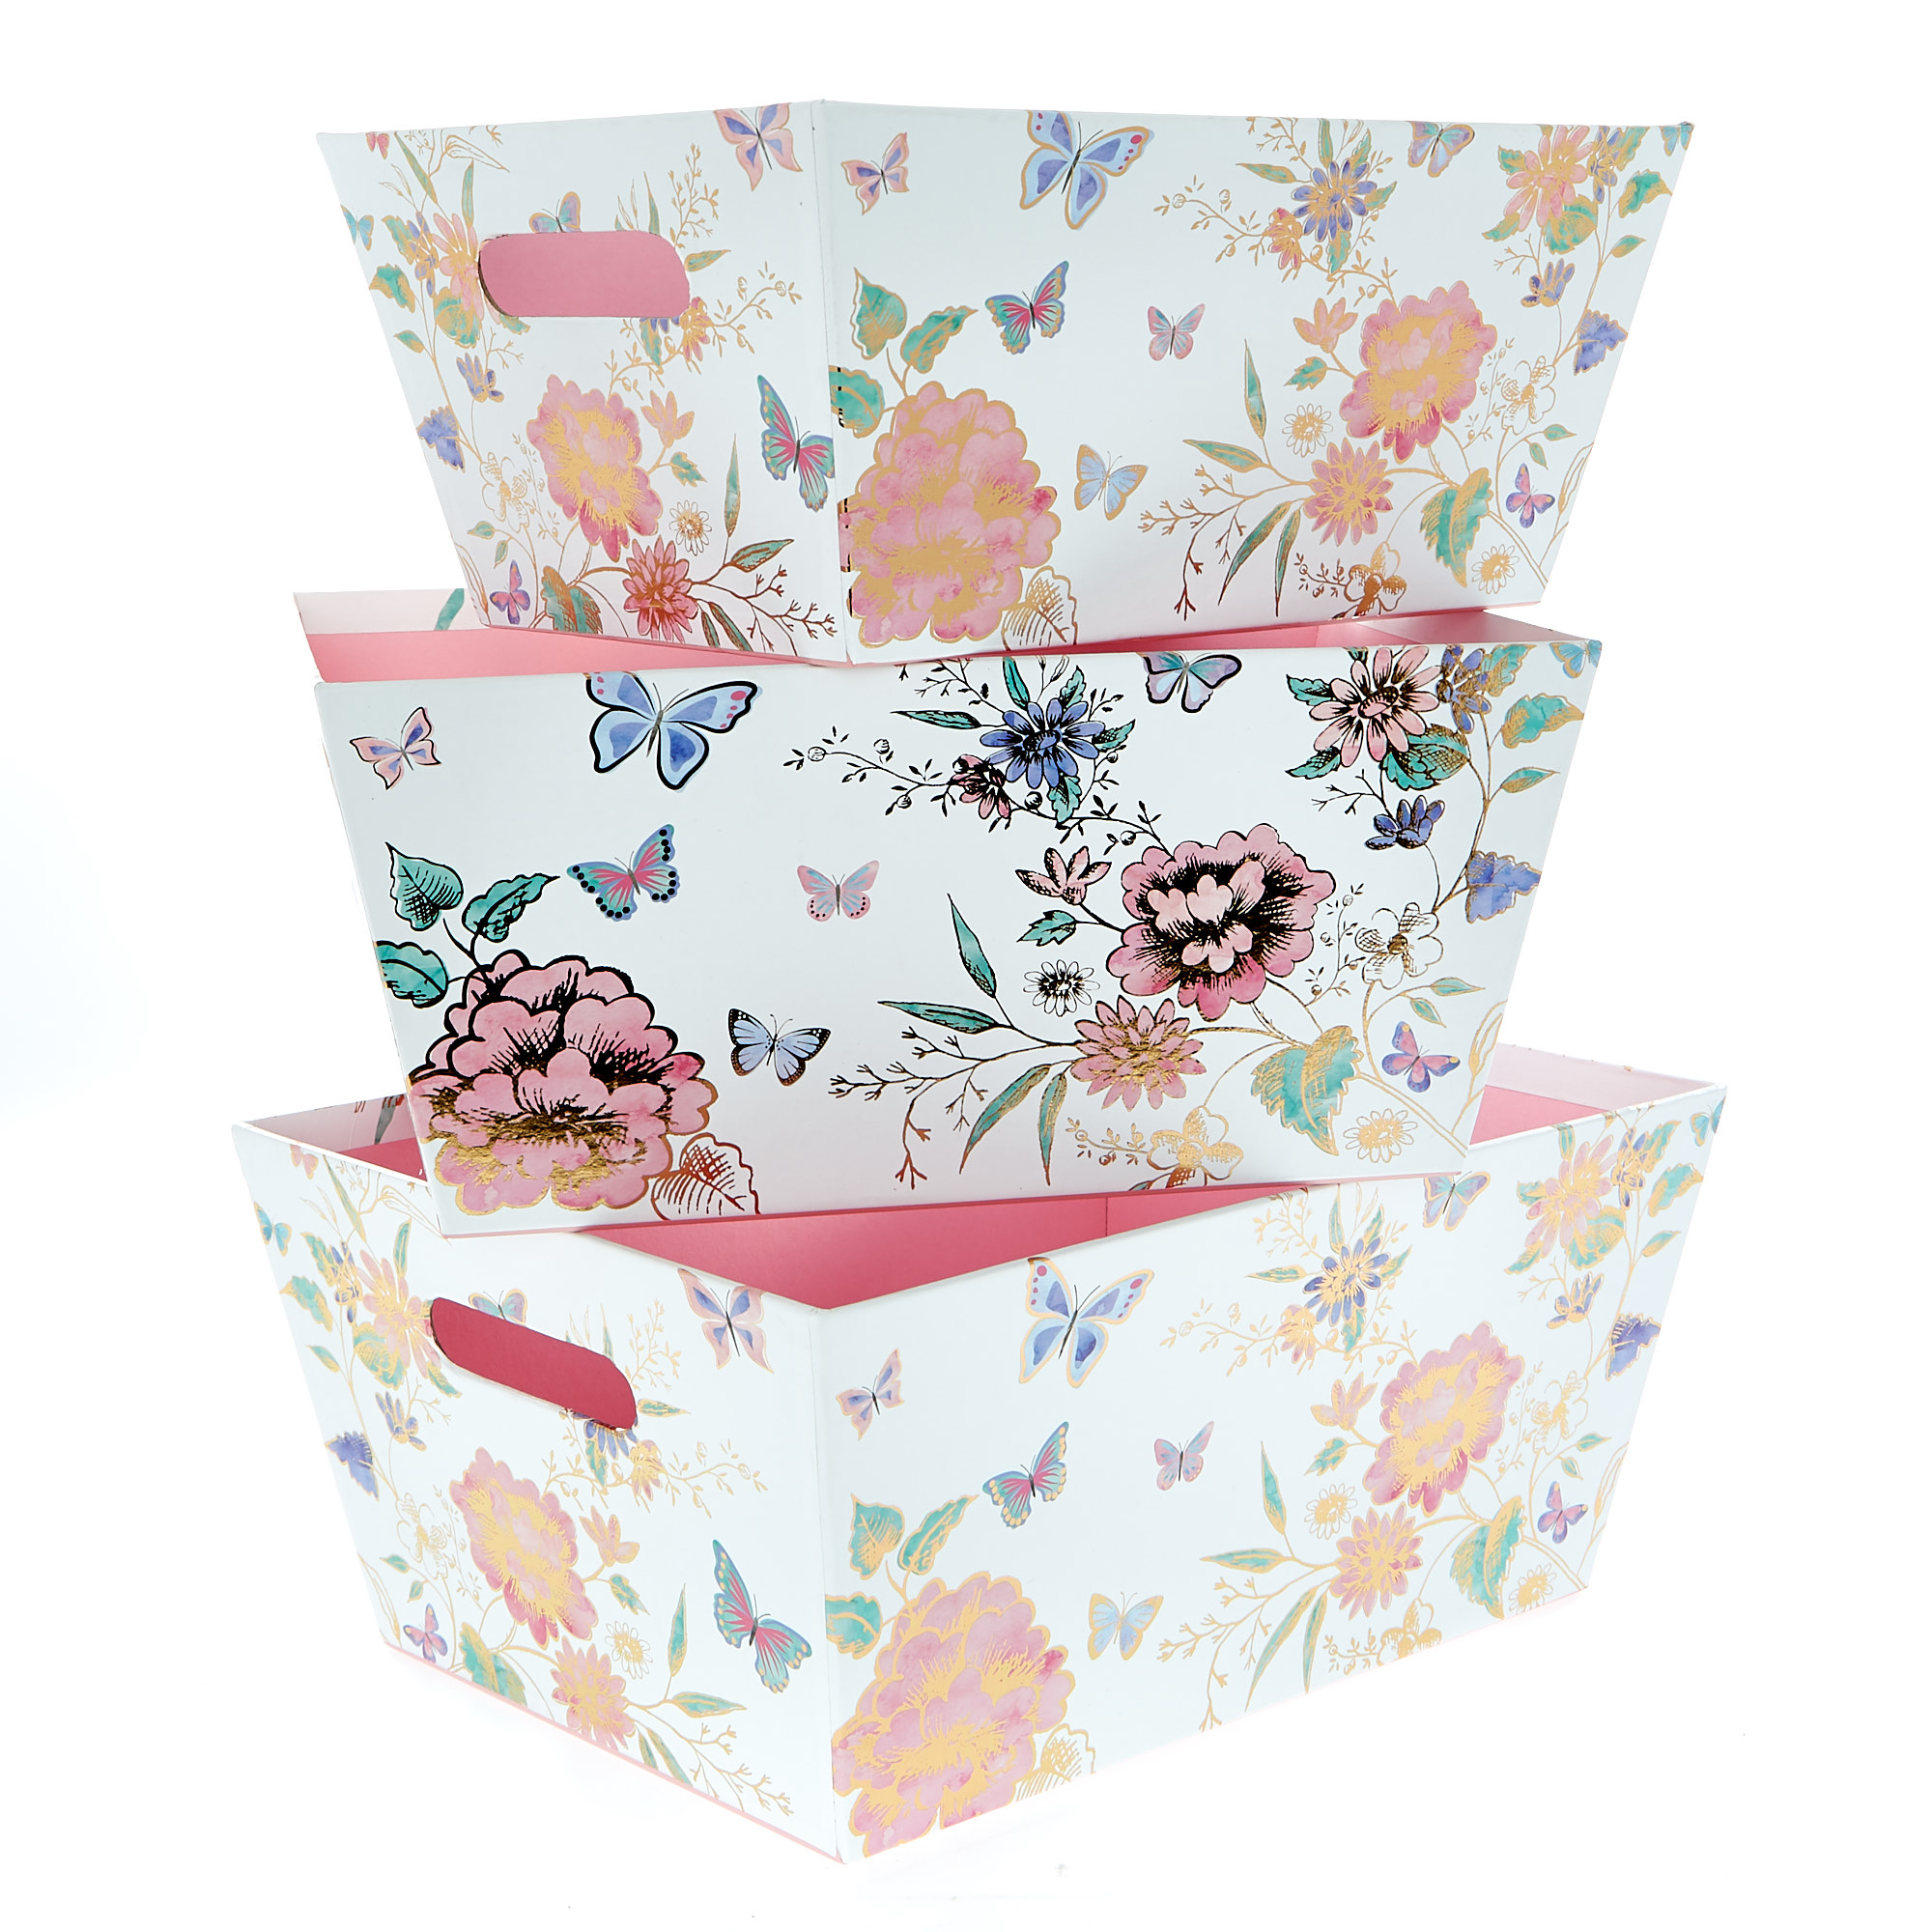 Flowers & Butterflies Tray Boxes - Set Of 3 